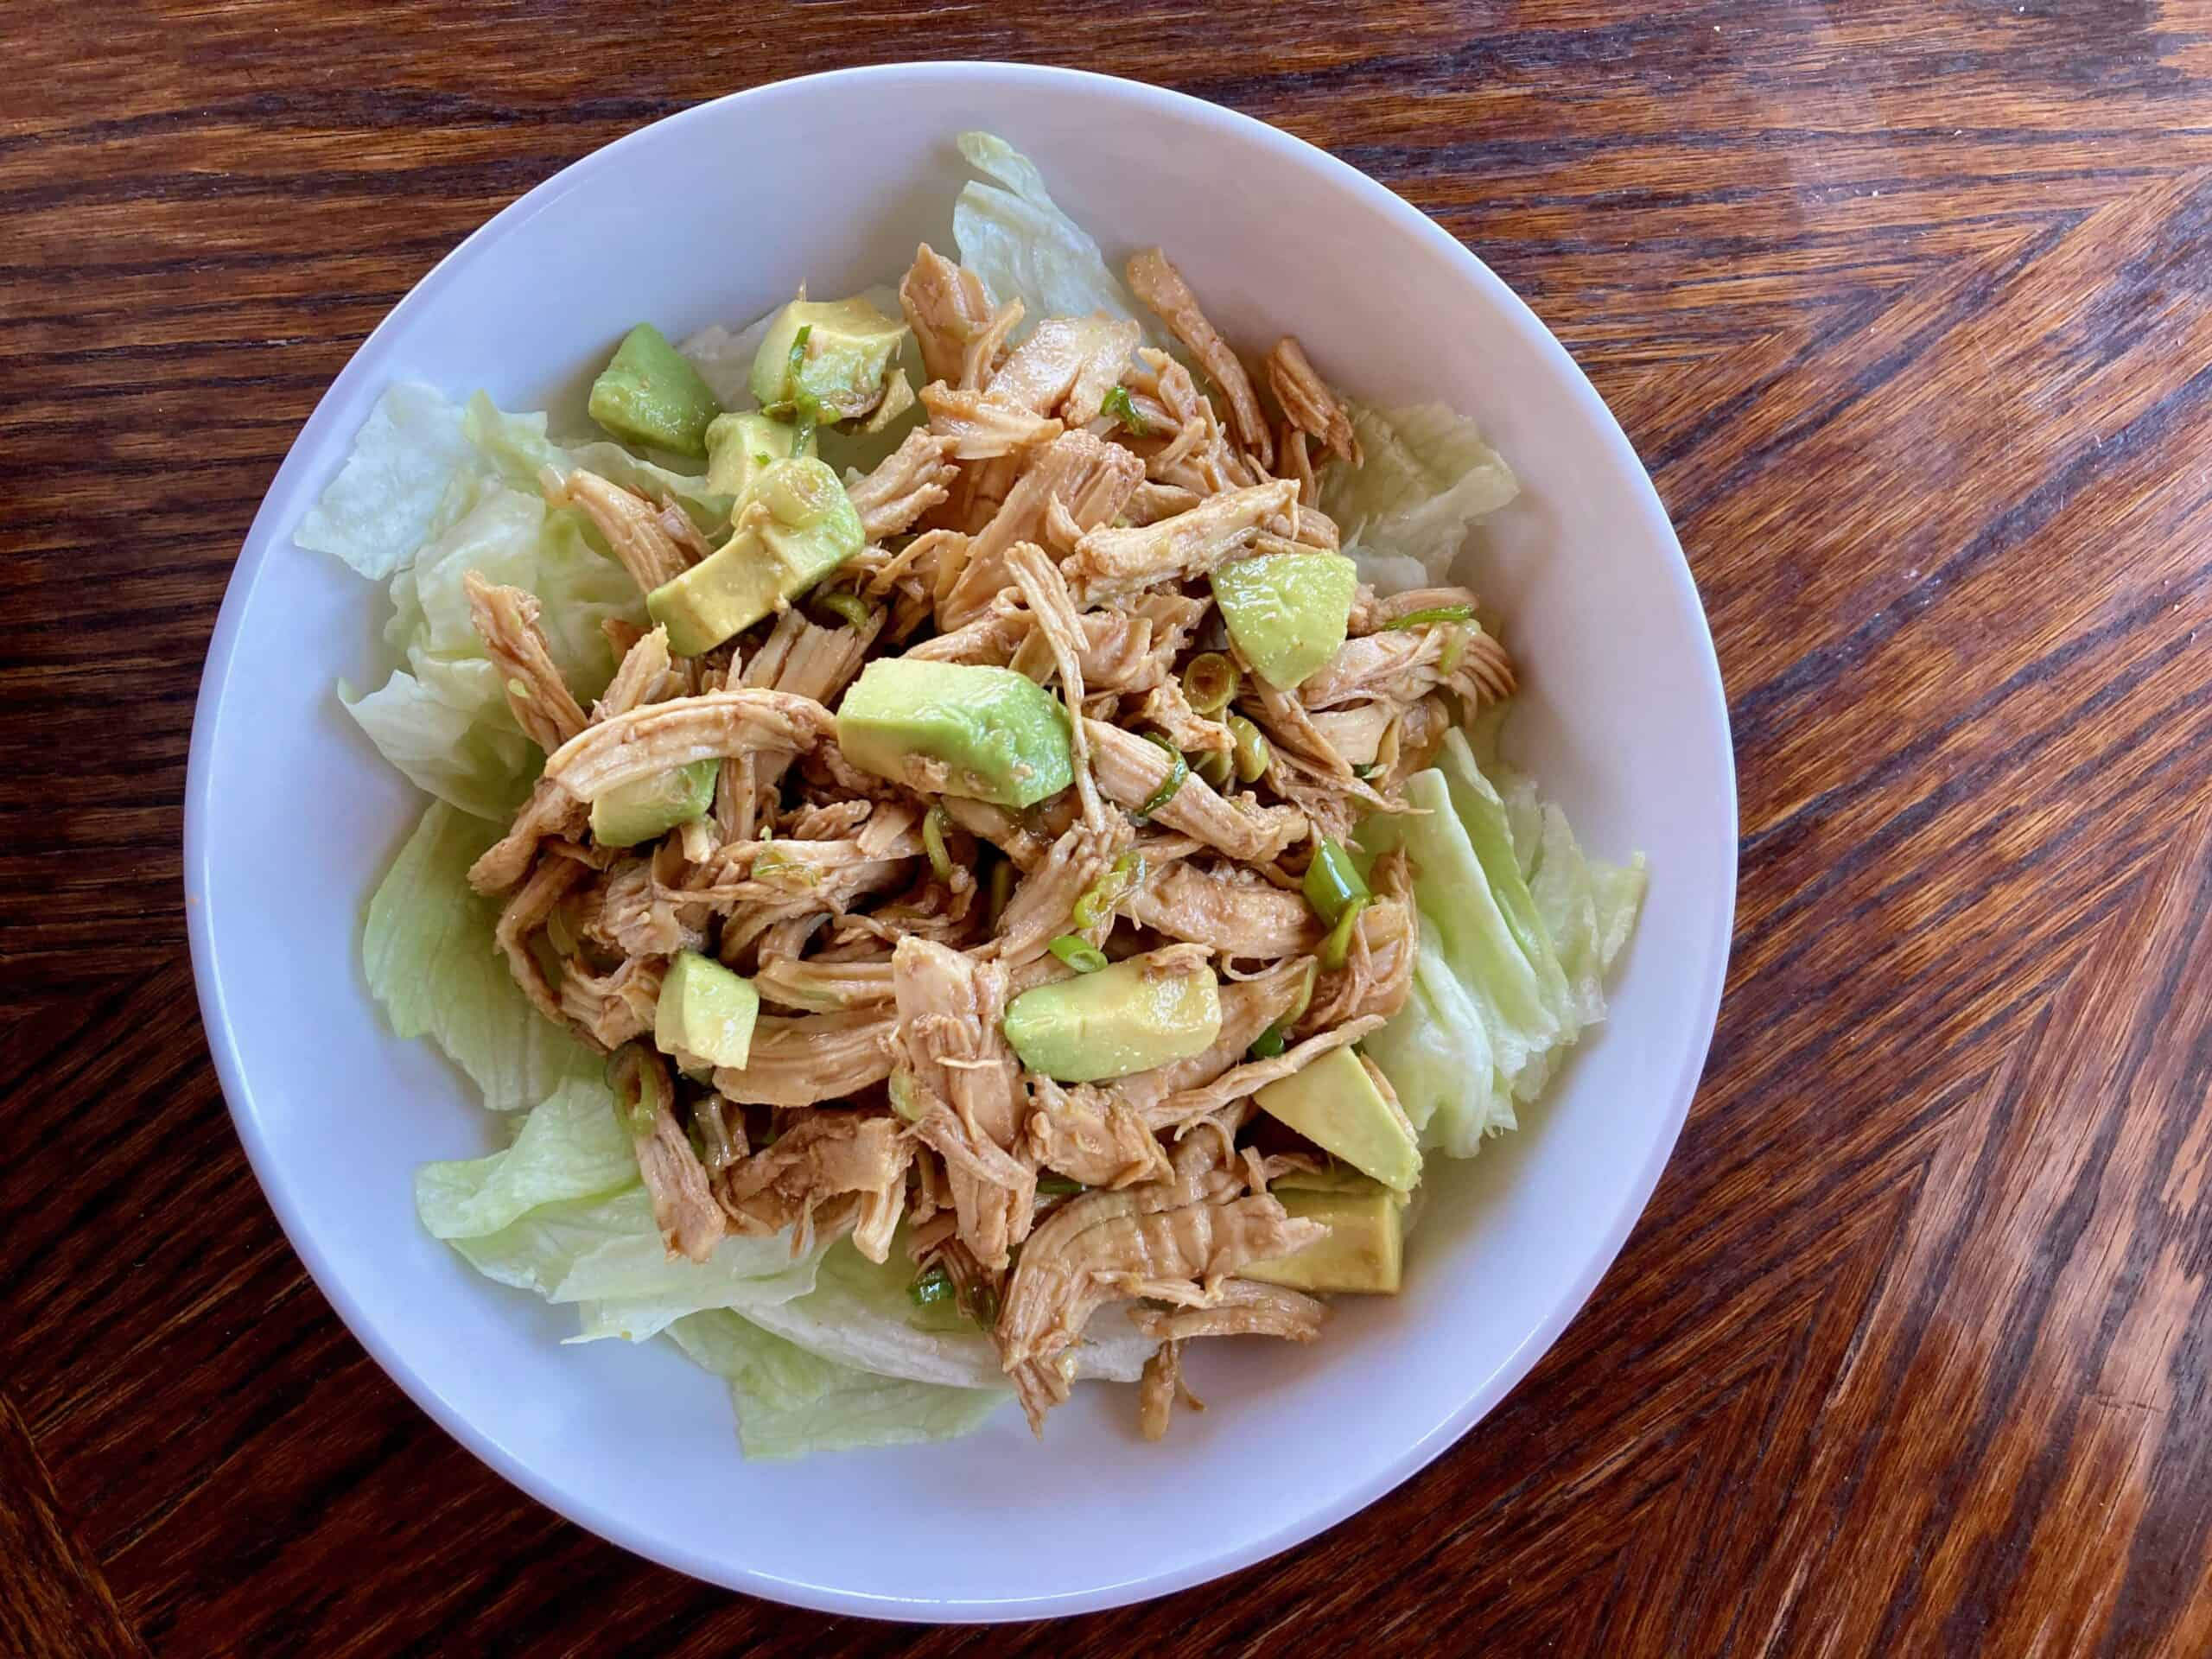 Shredded chicken and avocado on salad greens with Asian flavored dressing on a white plate shot from above.